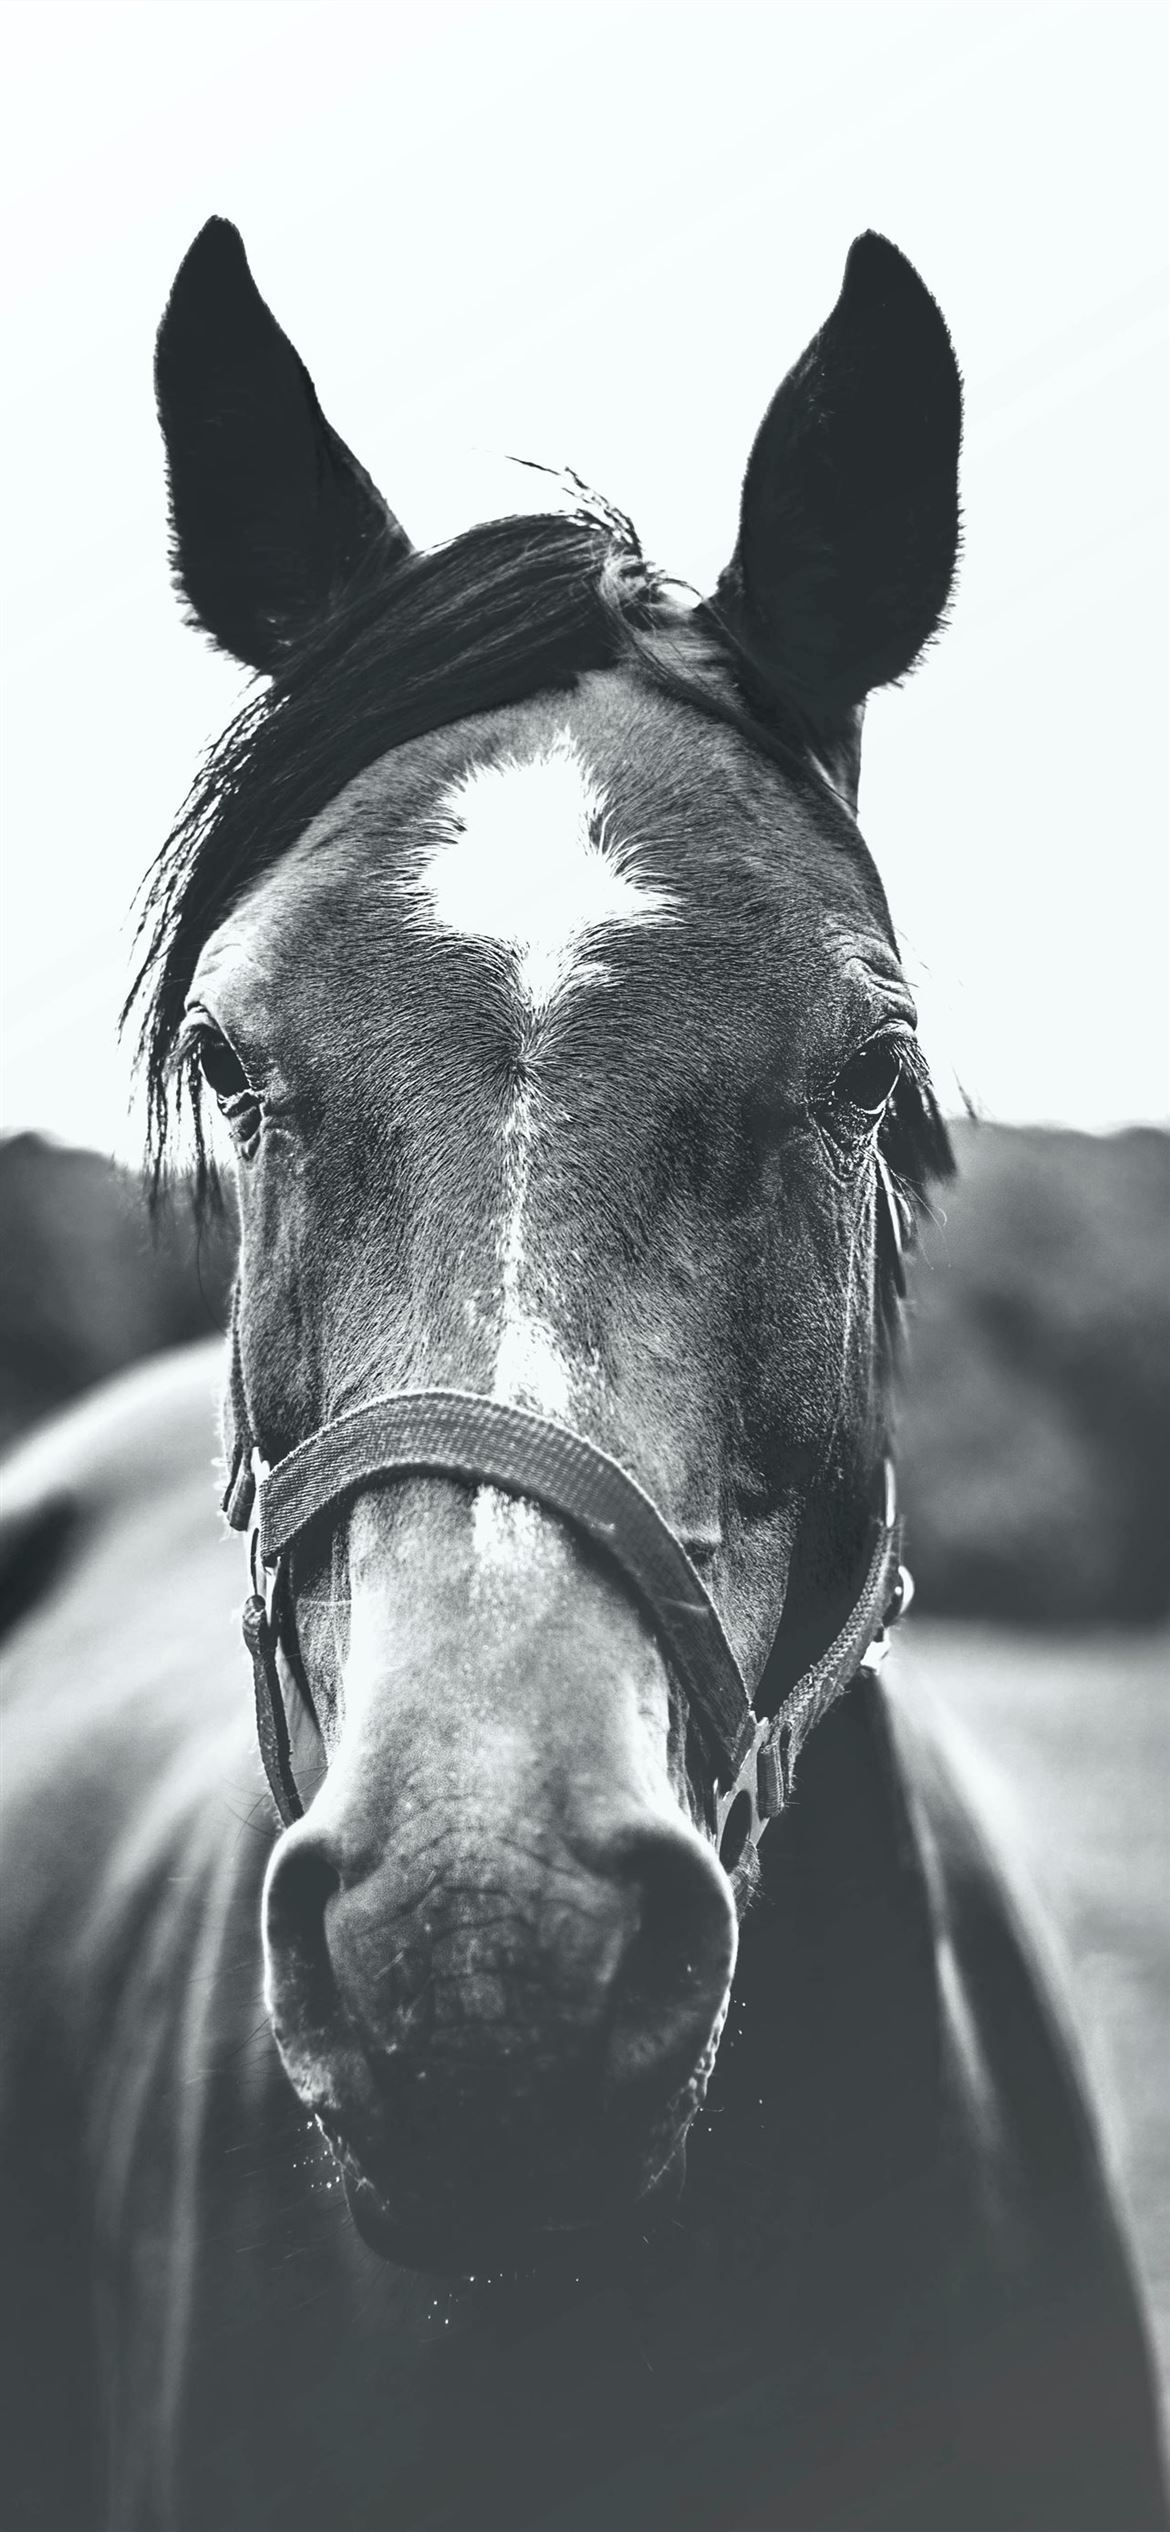 A close up of the face and head area - Horse